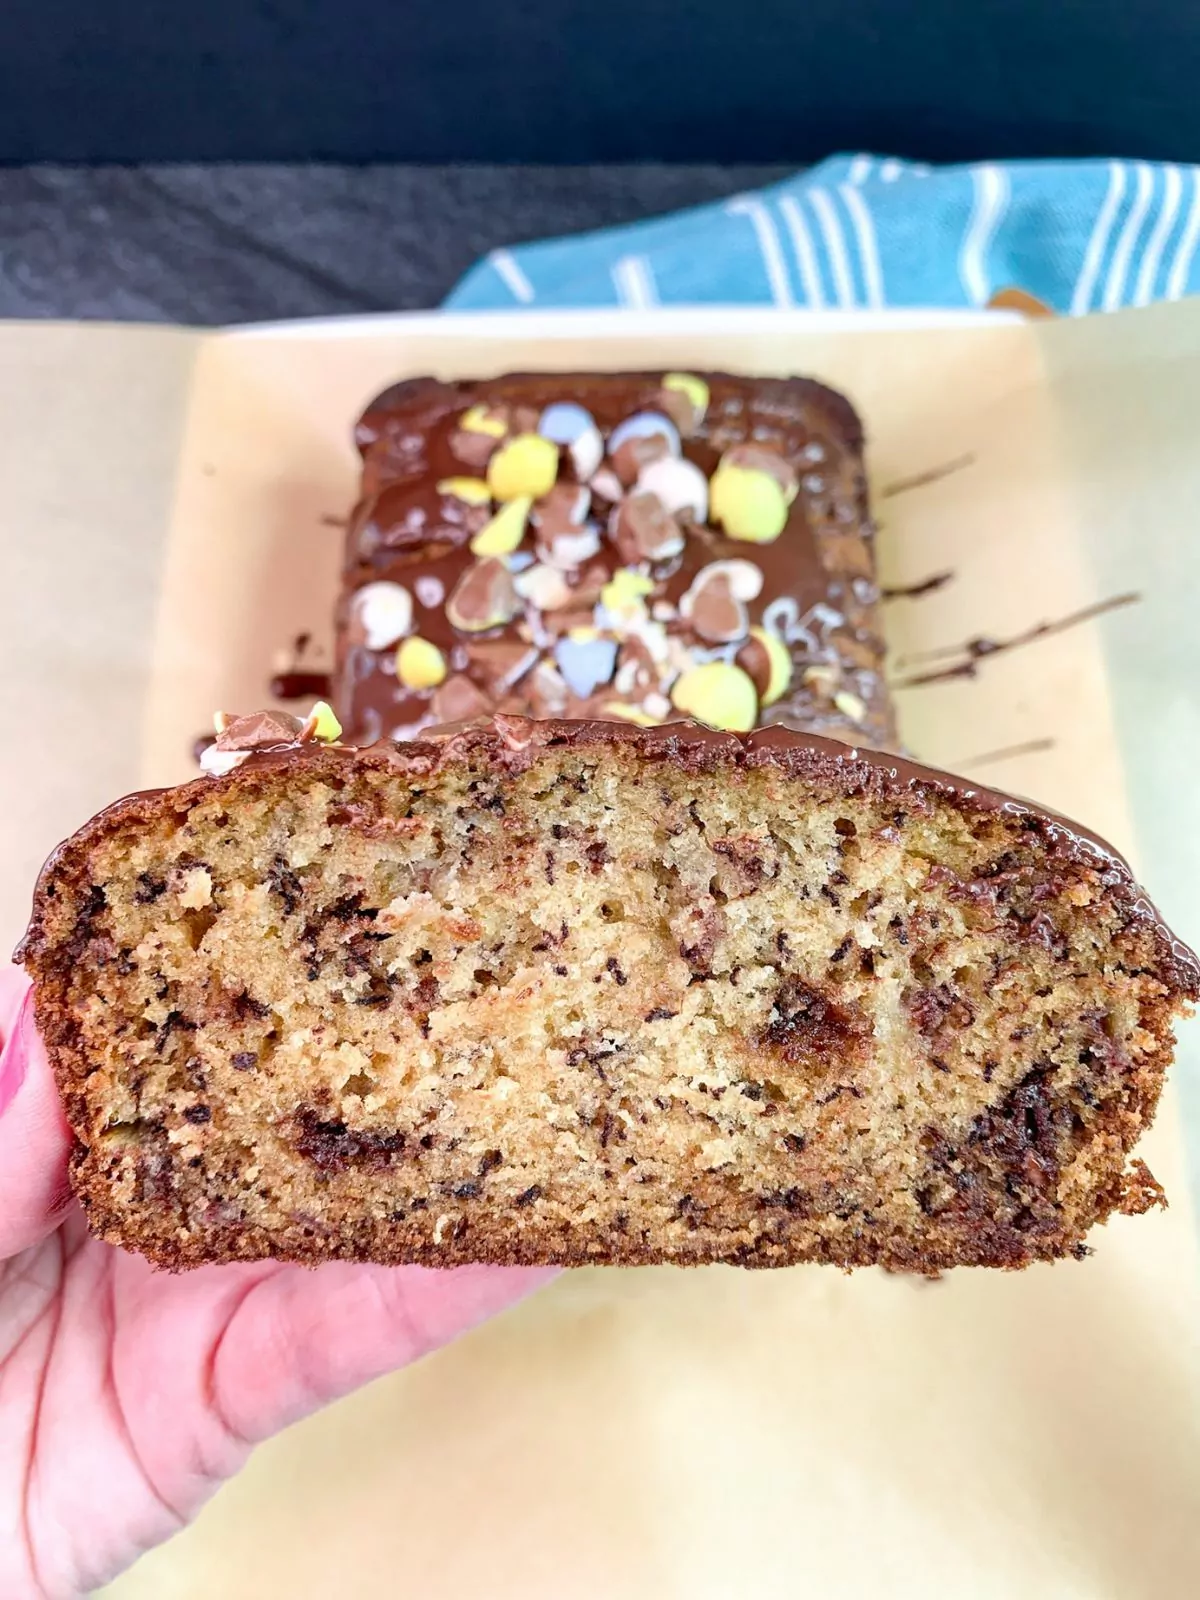 Slice of banana bread studded with leftover Easter candy.